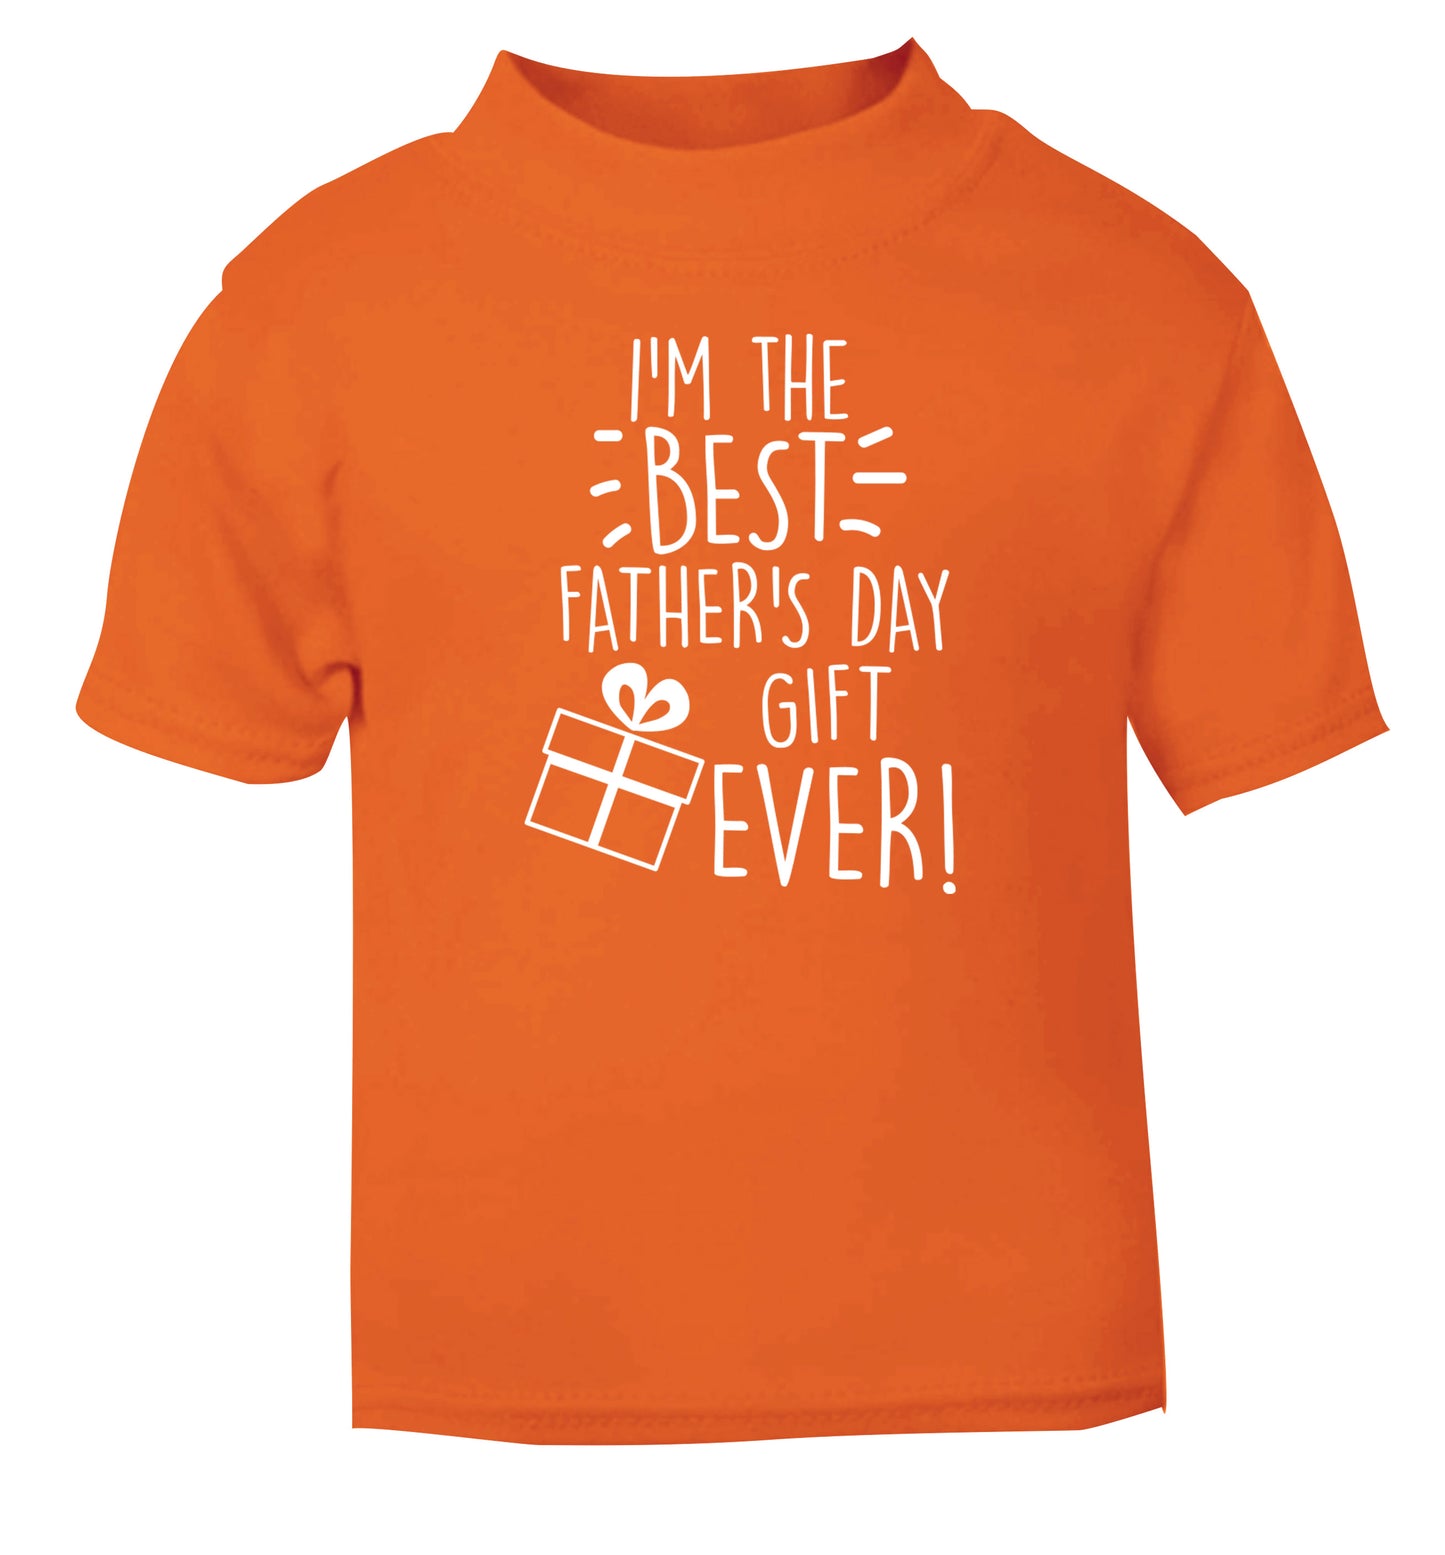 I'm the BEST father's day gift ever! orange Baby Toddler Tshirt 2 Years